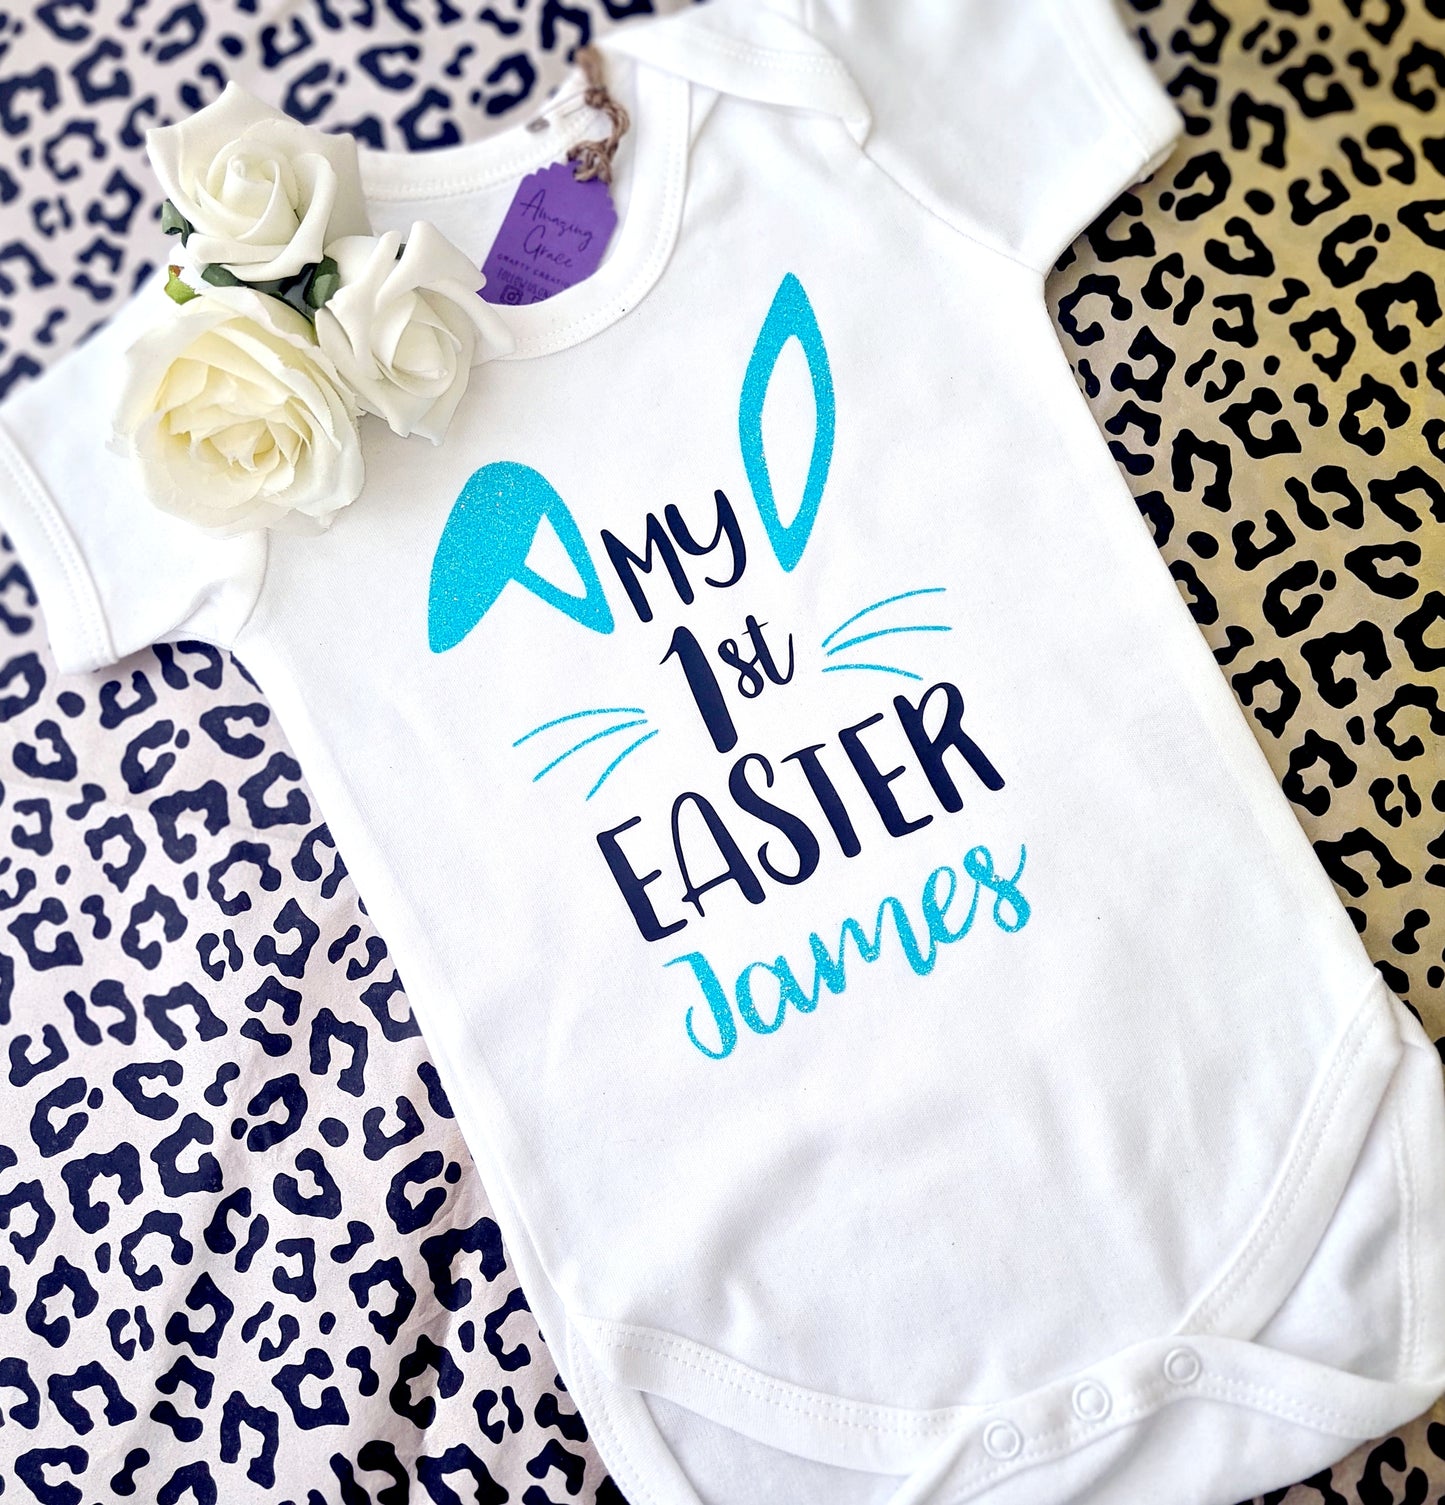 My 1st Easter cotton baby vest